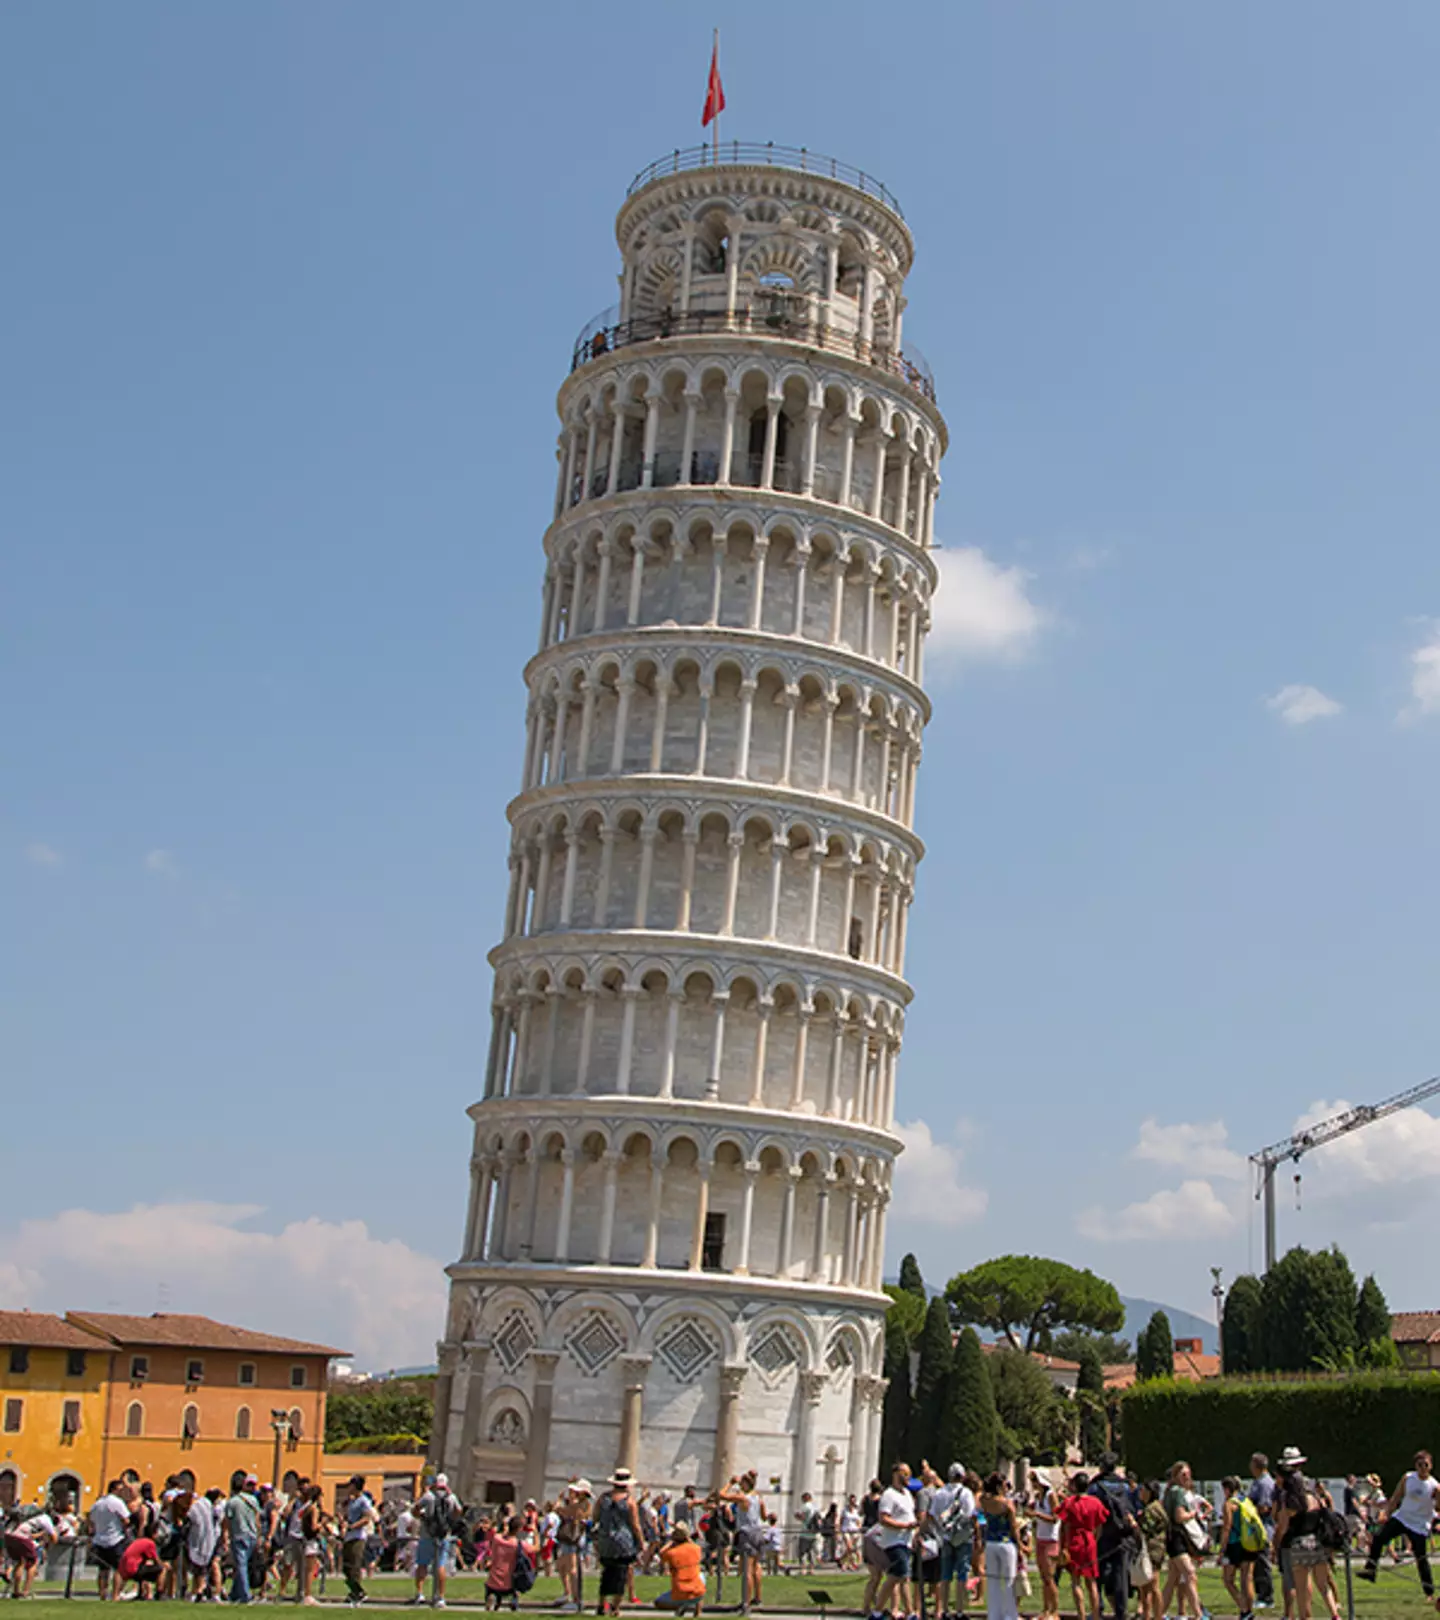 The Leaning Tower of Pisa was constructed on uneven soil / Athanasios Gioumpasis/Mondadori Portfolio/Getty Images